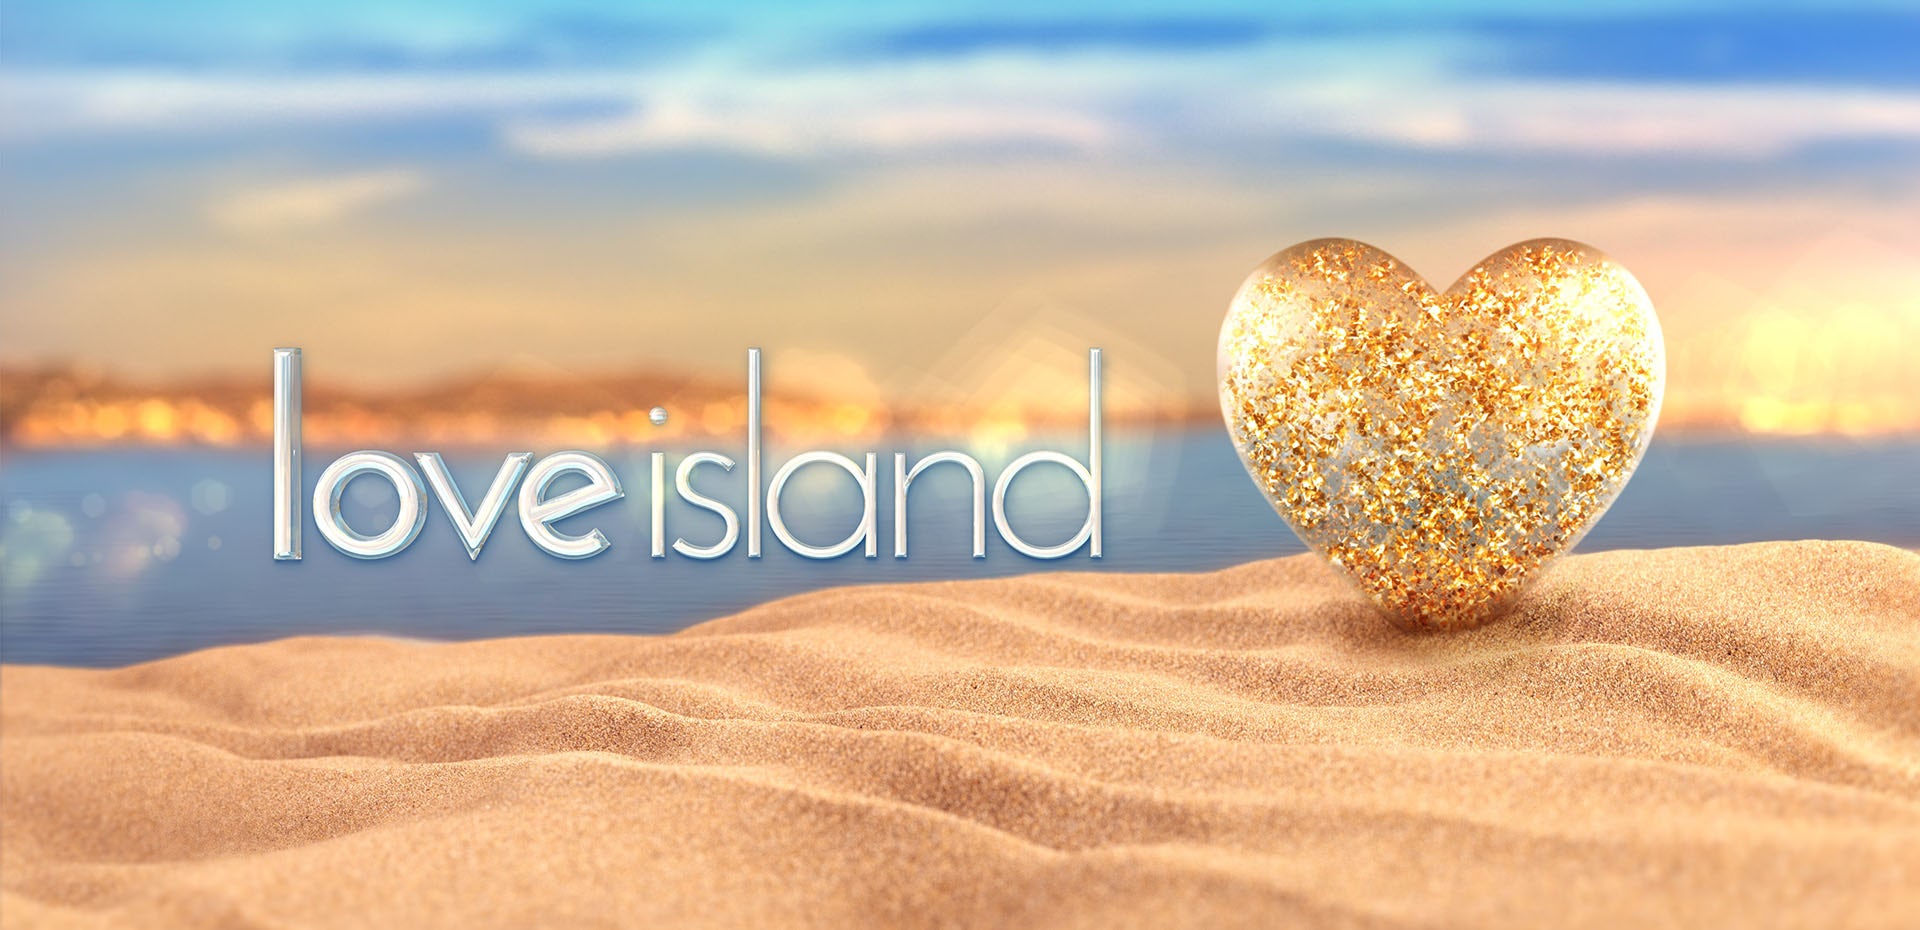 Love Island USA TwoHour Season 2 Premiere To Air On Thursday, May 21